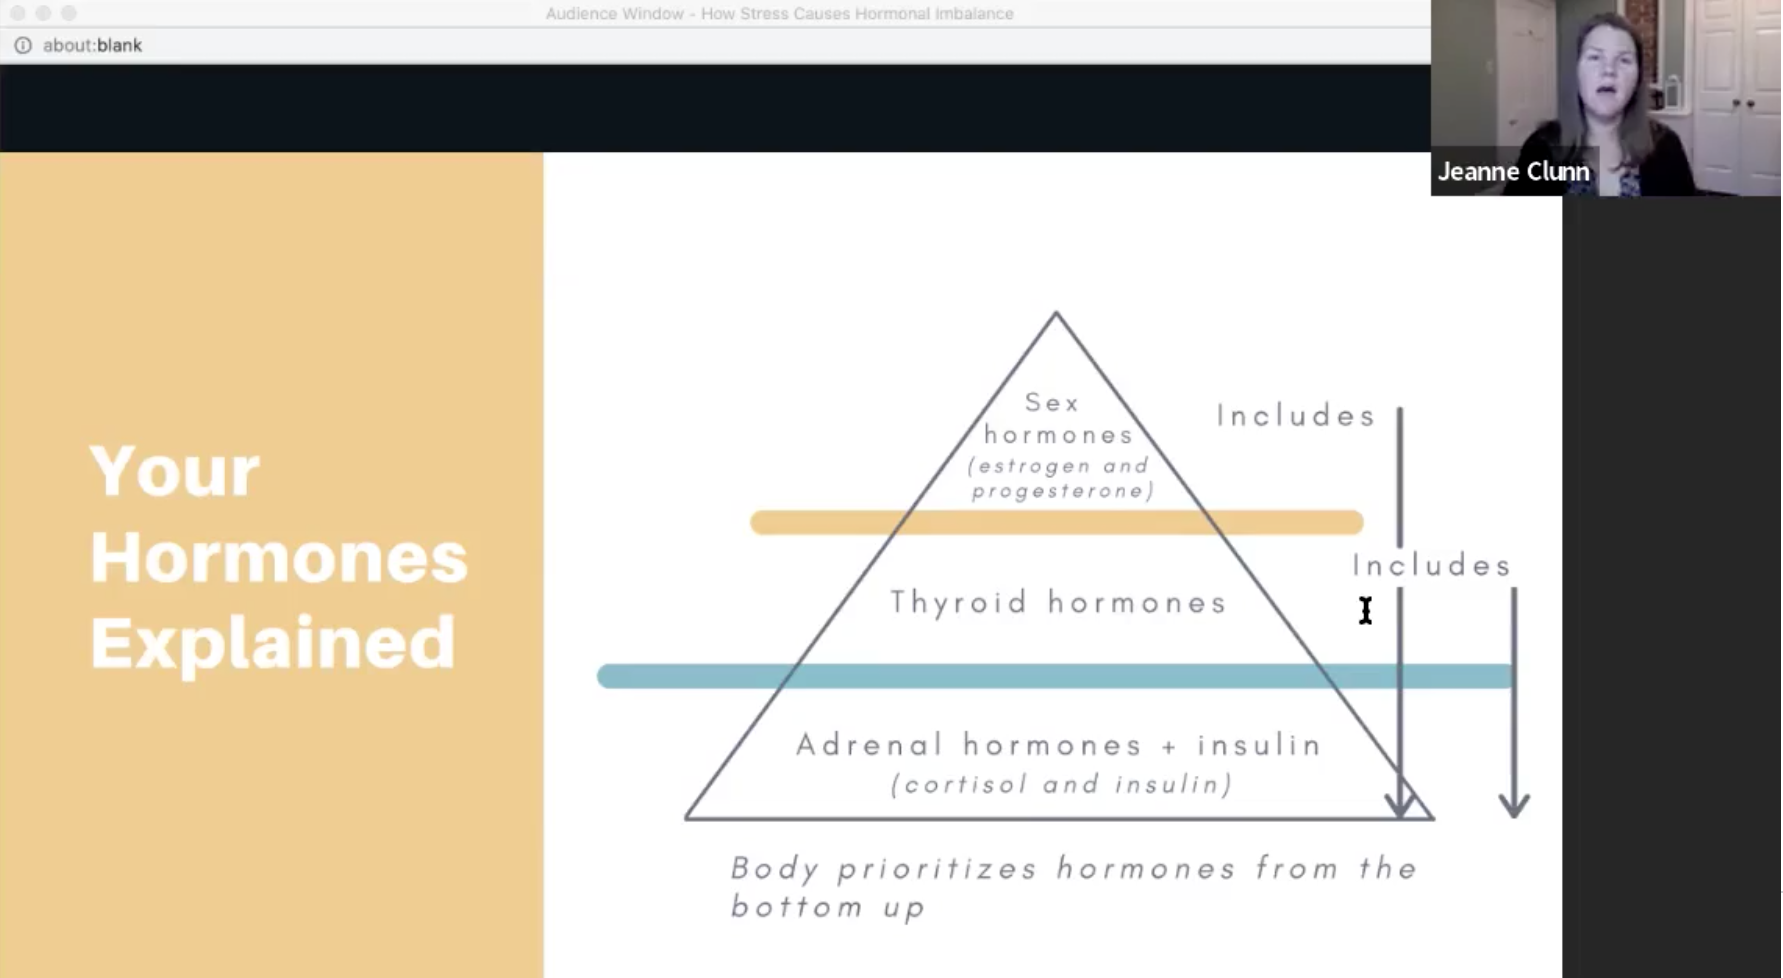 Triangle showing the hierarchy of adrenal, thyroid, and sex hormones